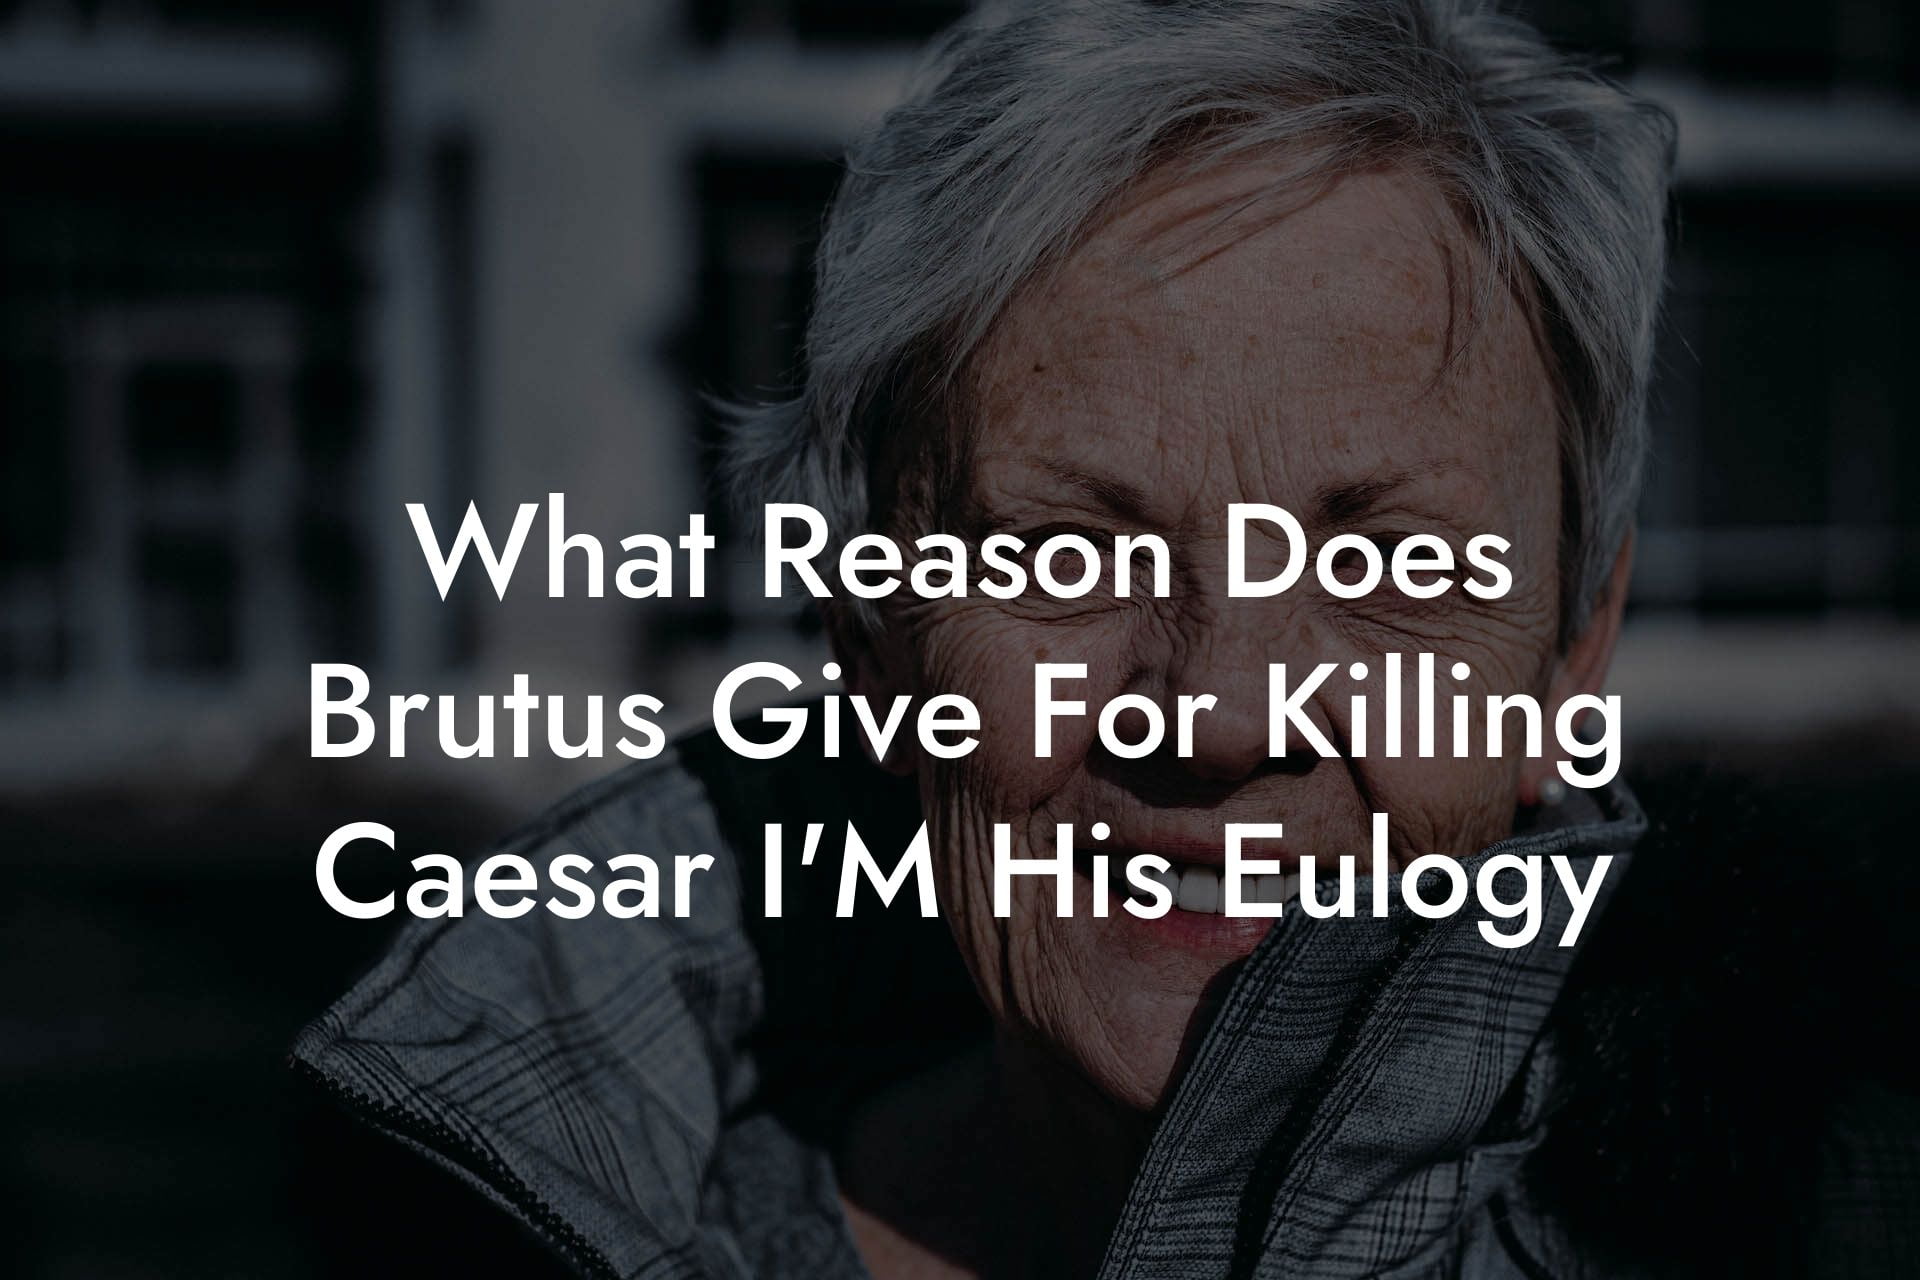 What Reason Does Brutus Give For Killing Caesar I'M His Eulogy